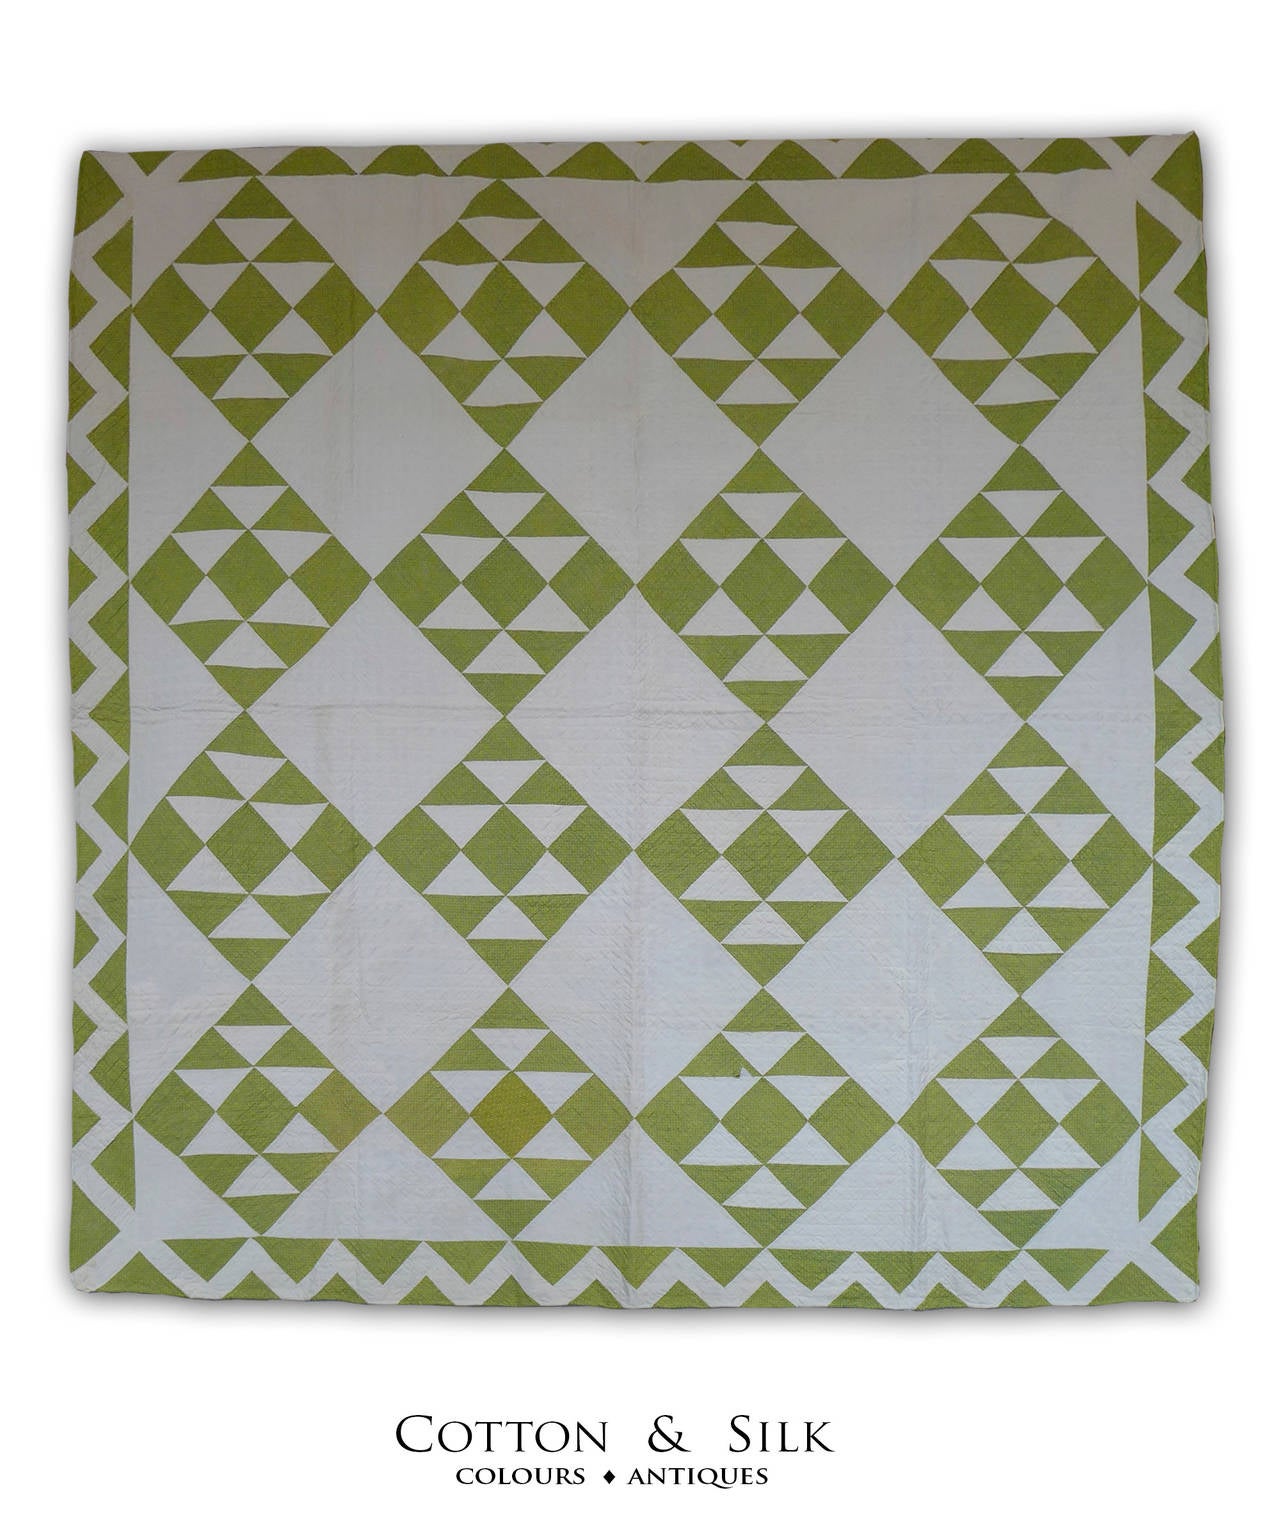 The soft lime green of this antique pattern is not a color ,but nature itself  in
the green of ferns in spring and the leaves of a tulip.
Perhaps the colors of Pennsylvania in 1880 where this quilt was made..,